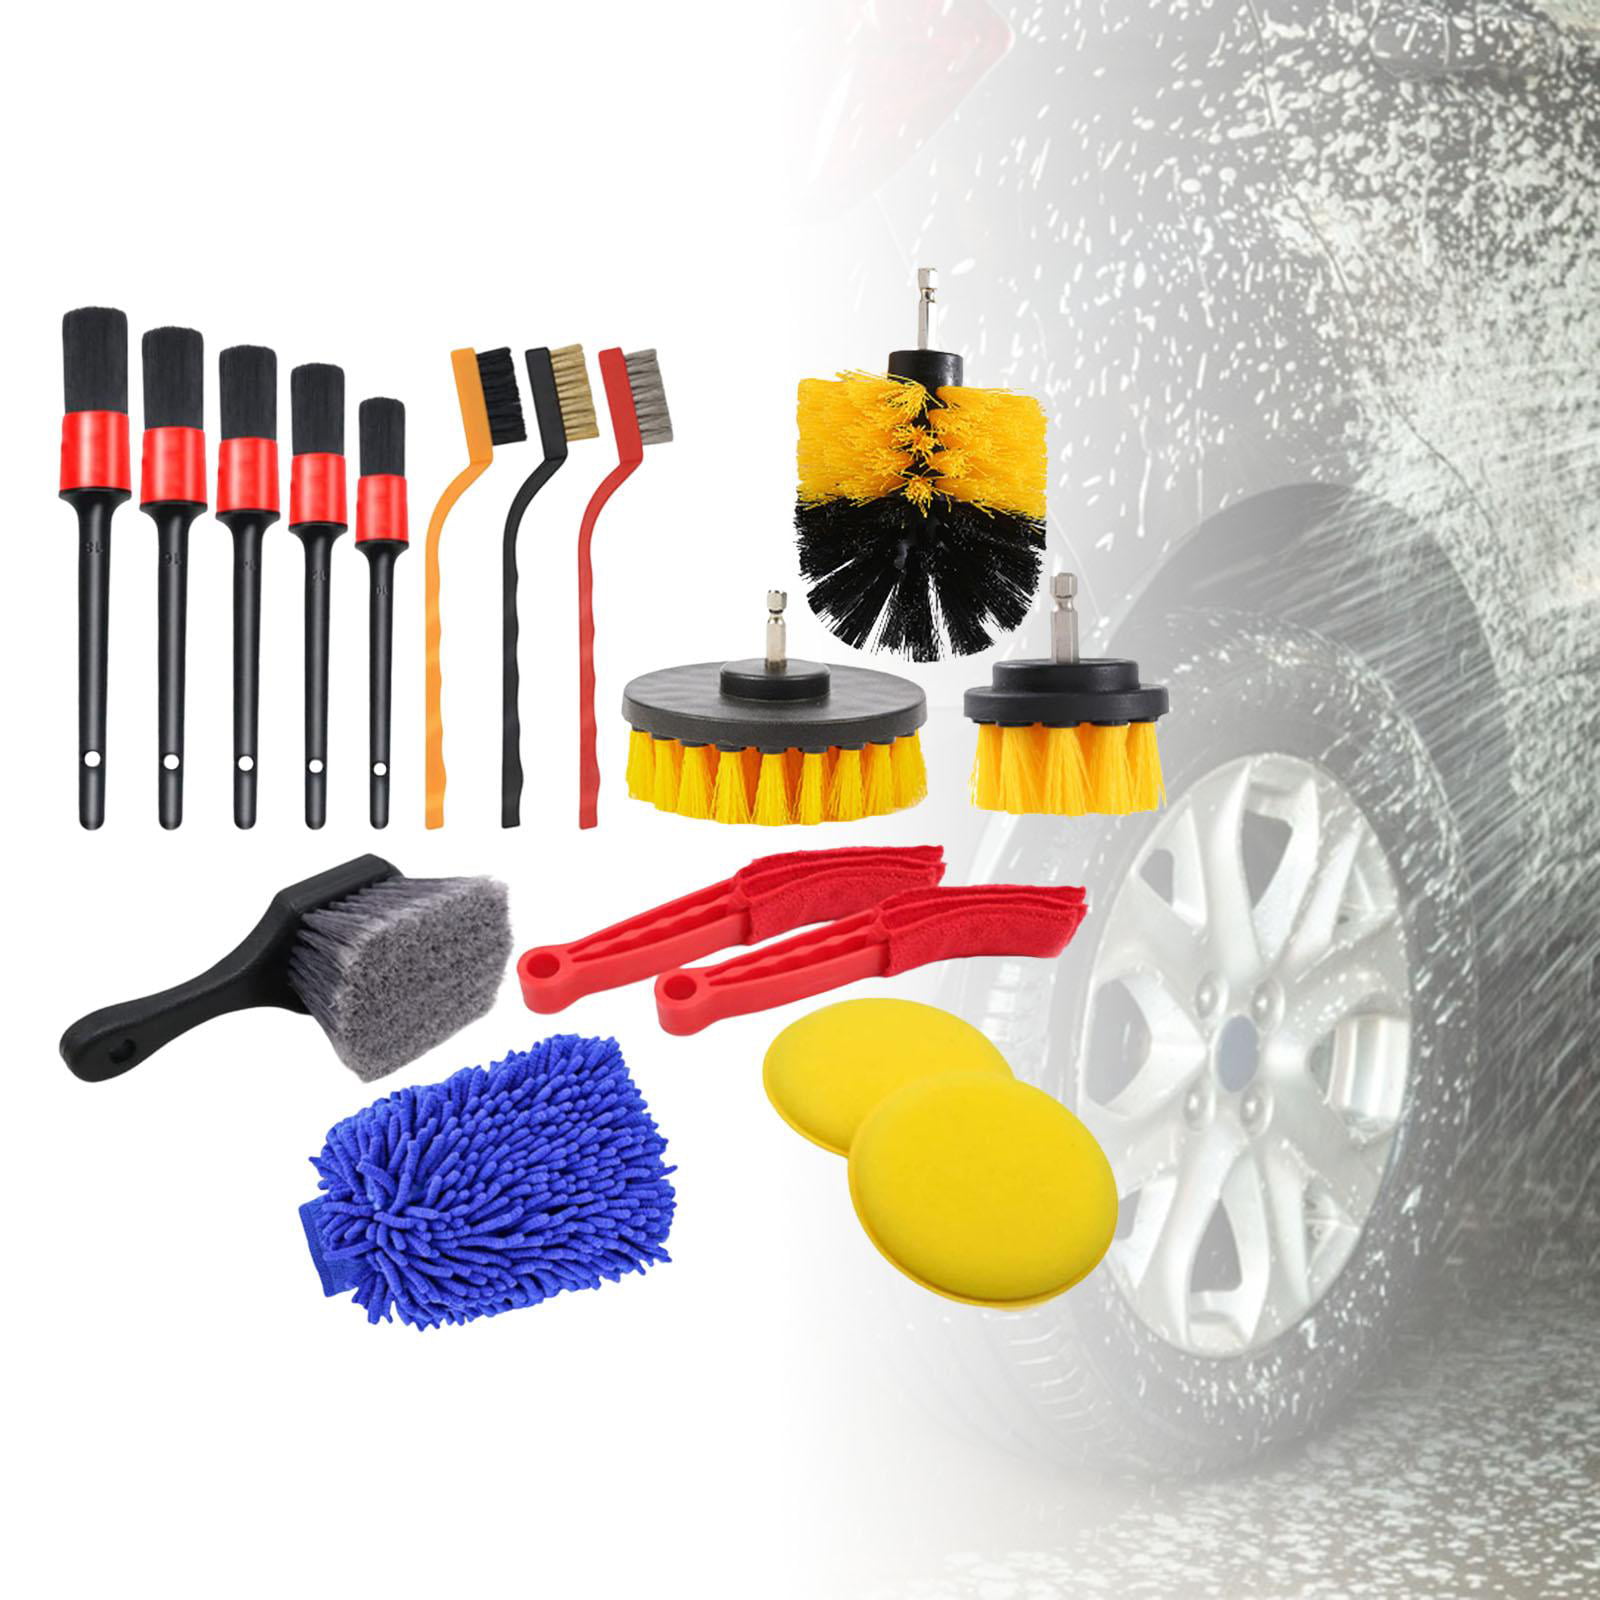 Dashboard Leather Yellow Drill Detail Brush Set Exterior Cleaning Kit for Cleaning Wheels 18 Pcs Car Detailing Brushes Kit Interior Air Conditioner 